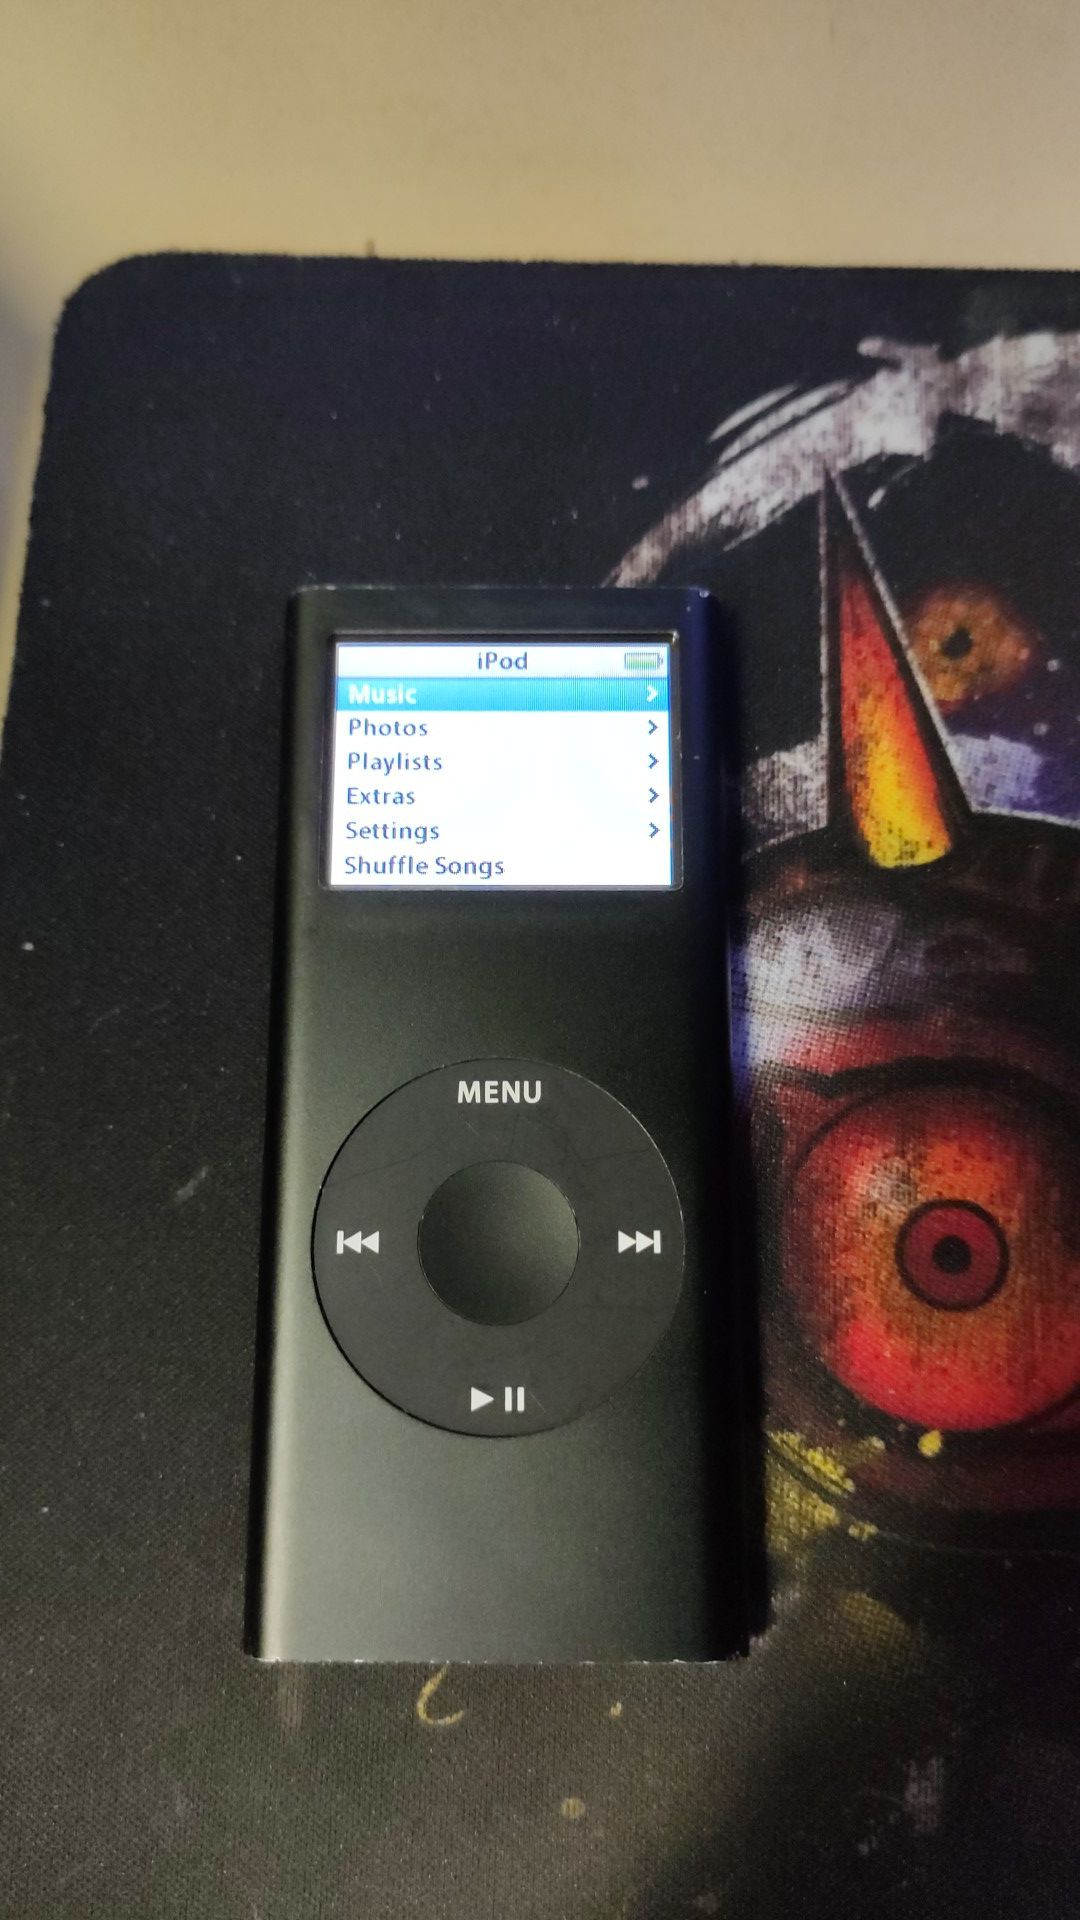 Apple iPod Nano Gen 2 8GB with charge/sync cable